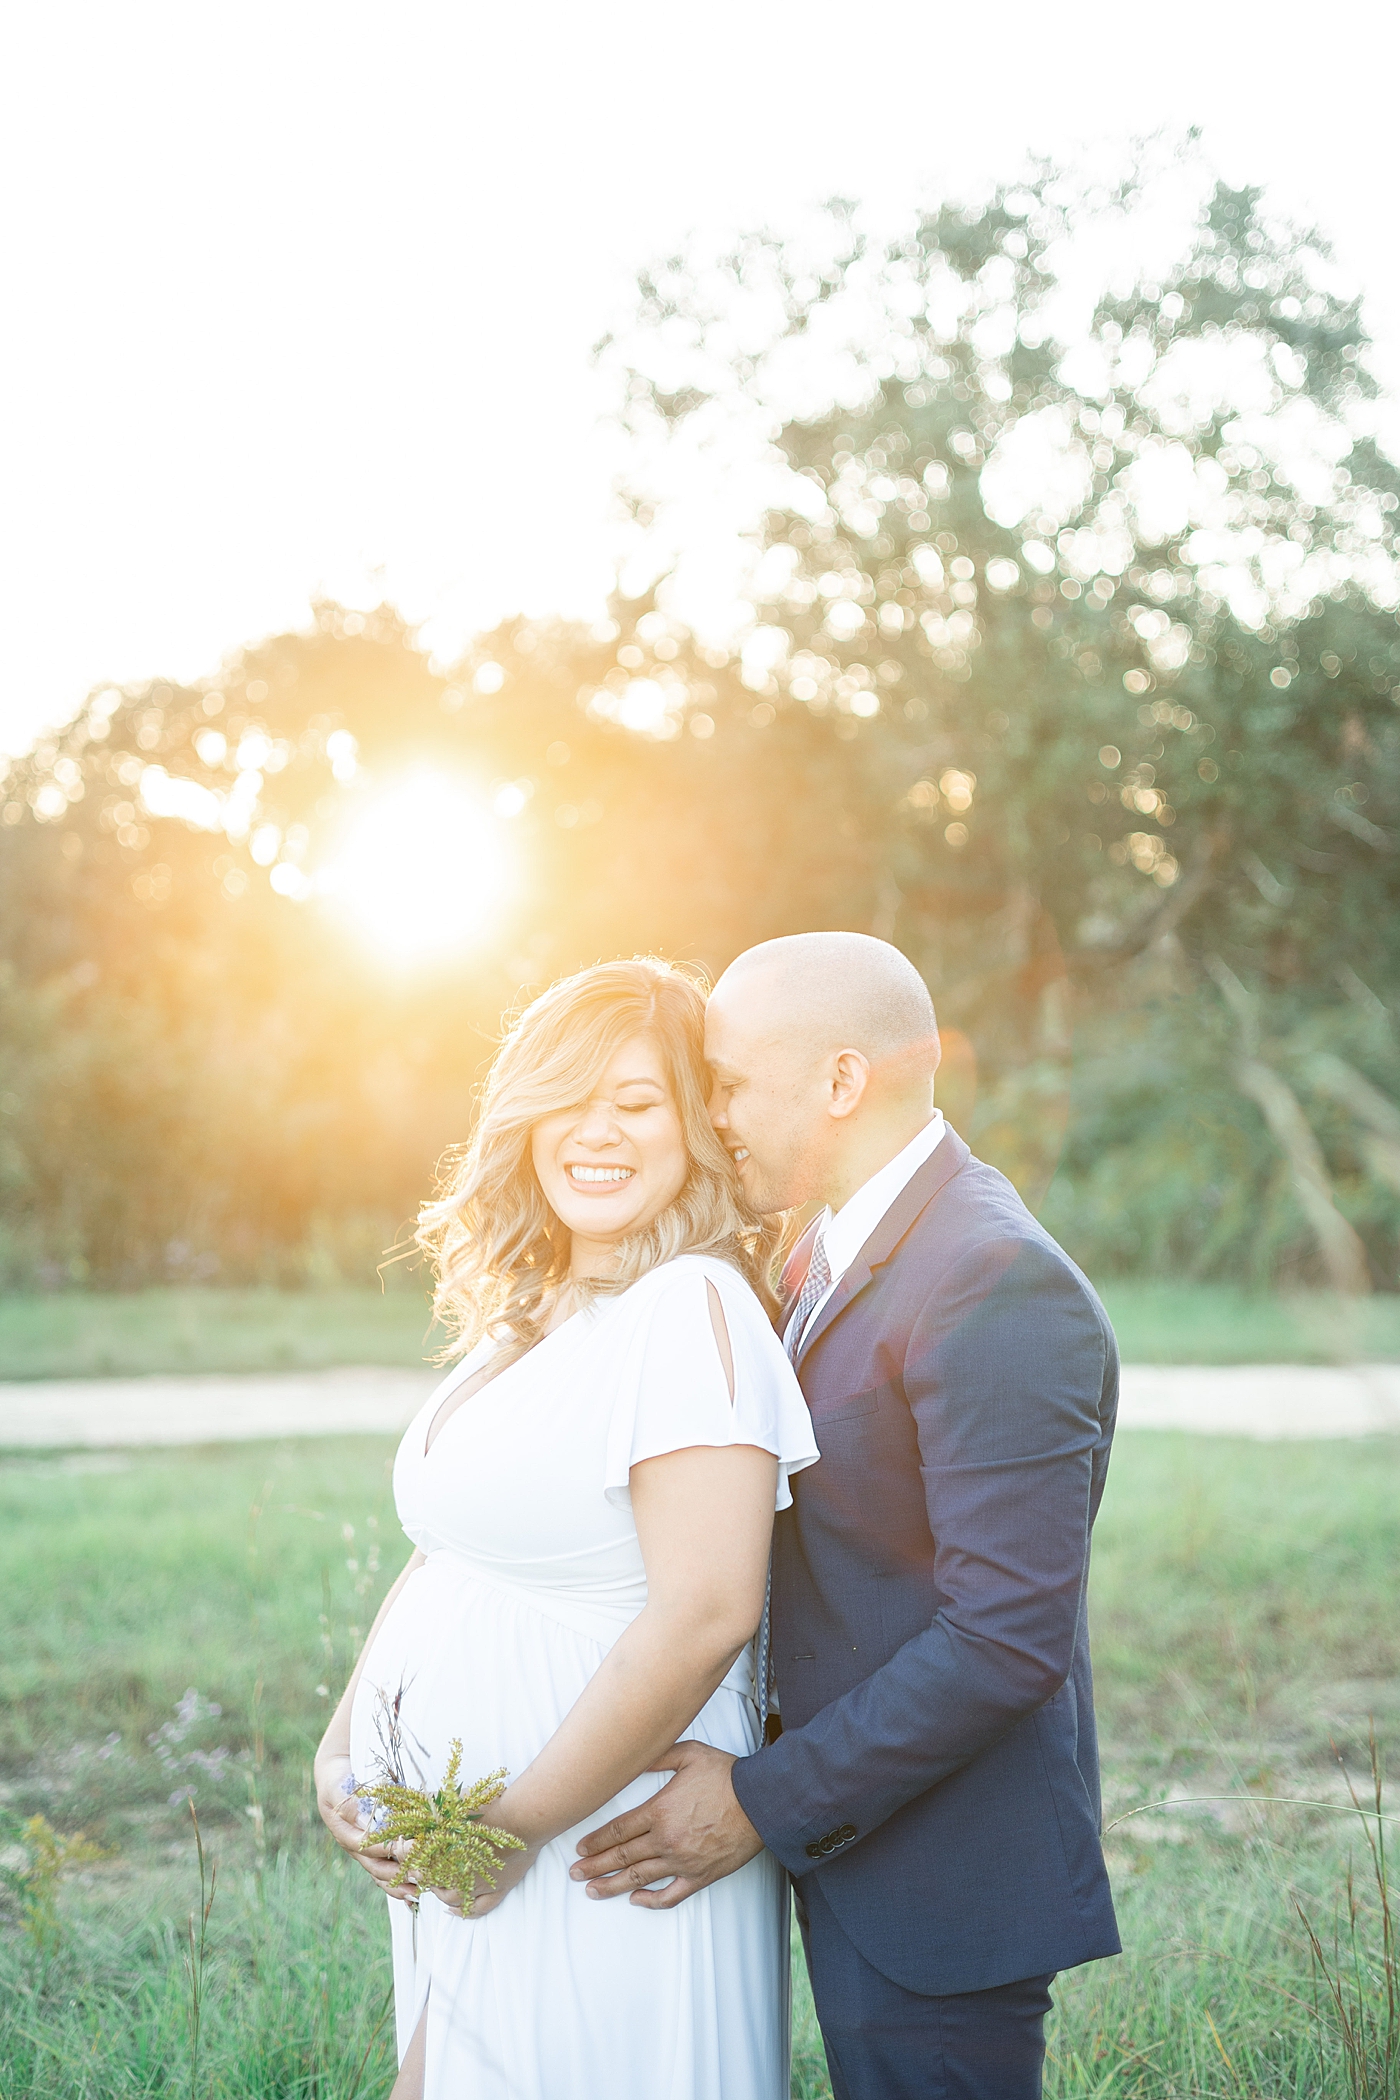 Mom and dad to be laughing together in a field | Photo by Gulfport MS Maternity and Newborn Photographer Little Sunshine Photography 